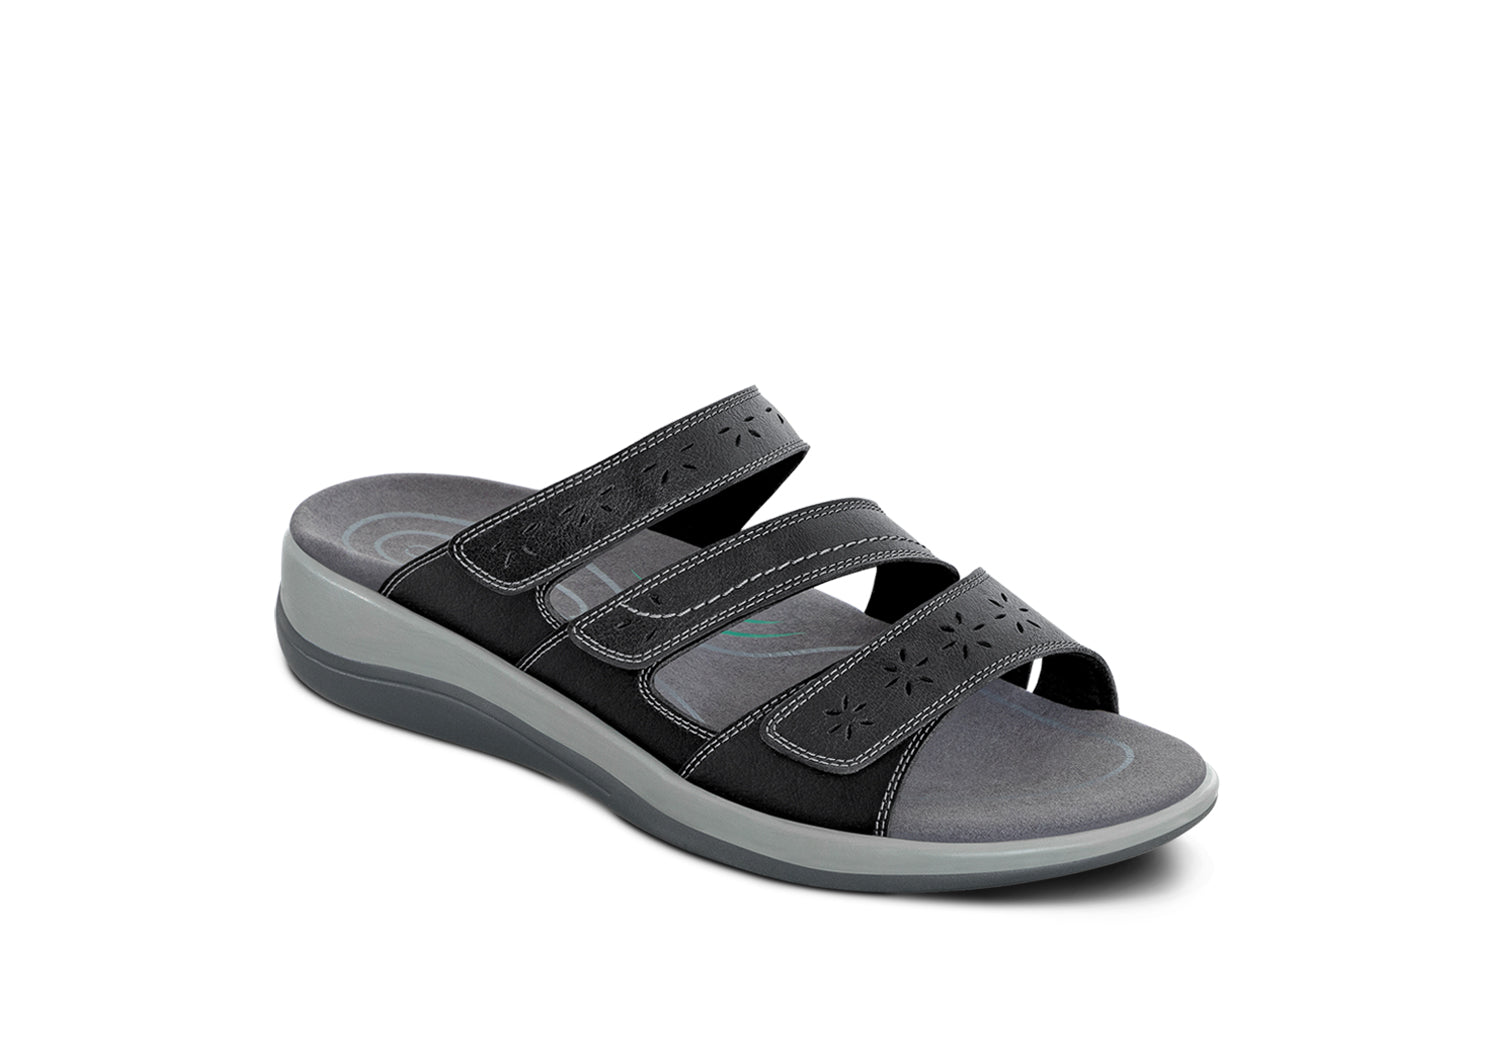 Women's Arch Support Slide Orthotic Sandals